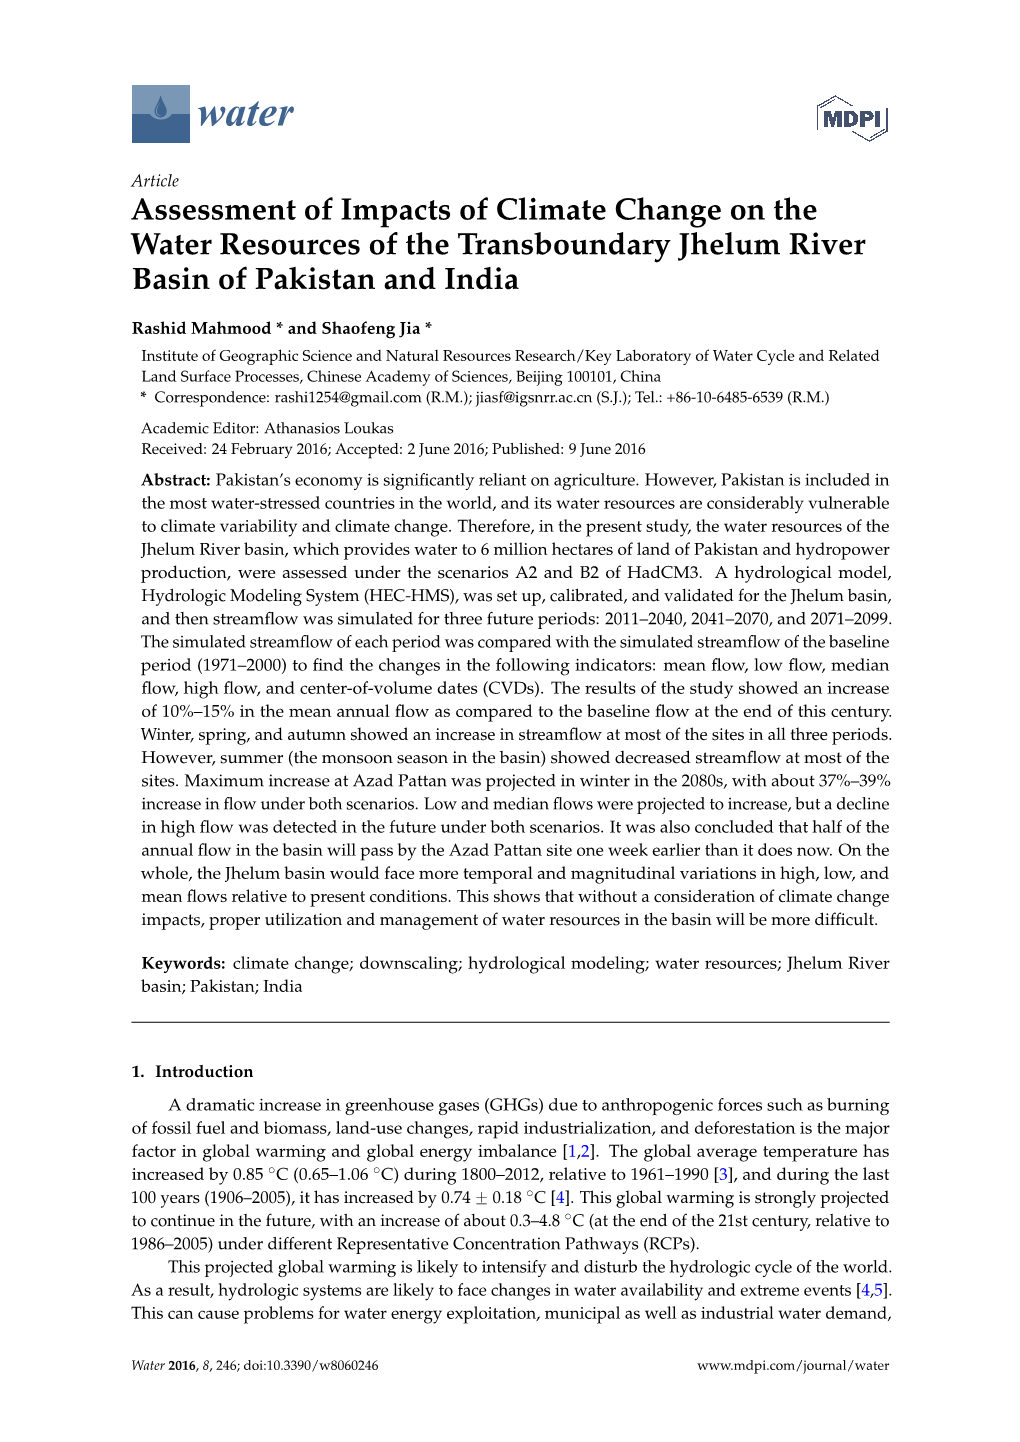 Assessment of Impacts of Climate Change on the Water Resources of the Transboundary Jhelum River Basin of Pakistan and India